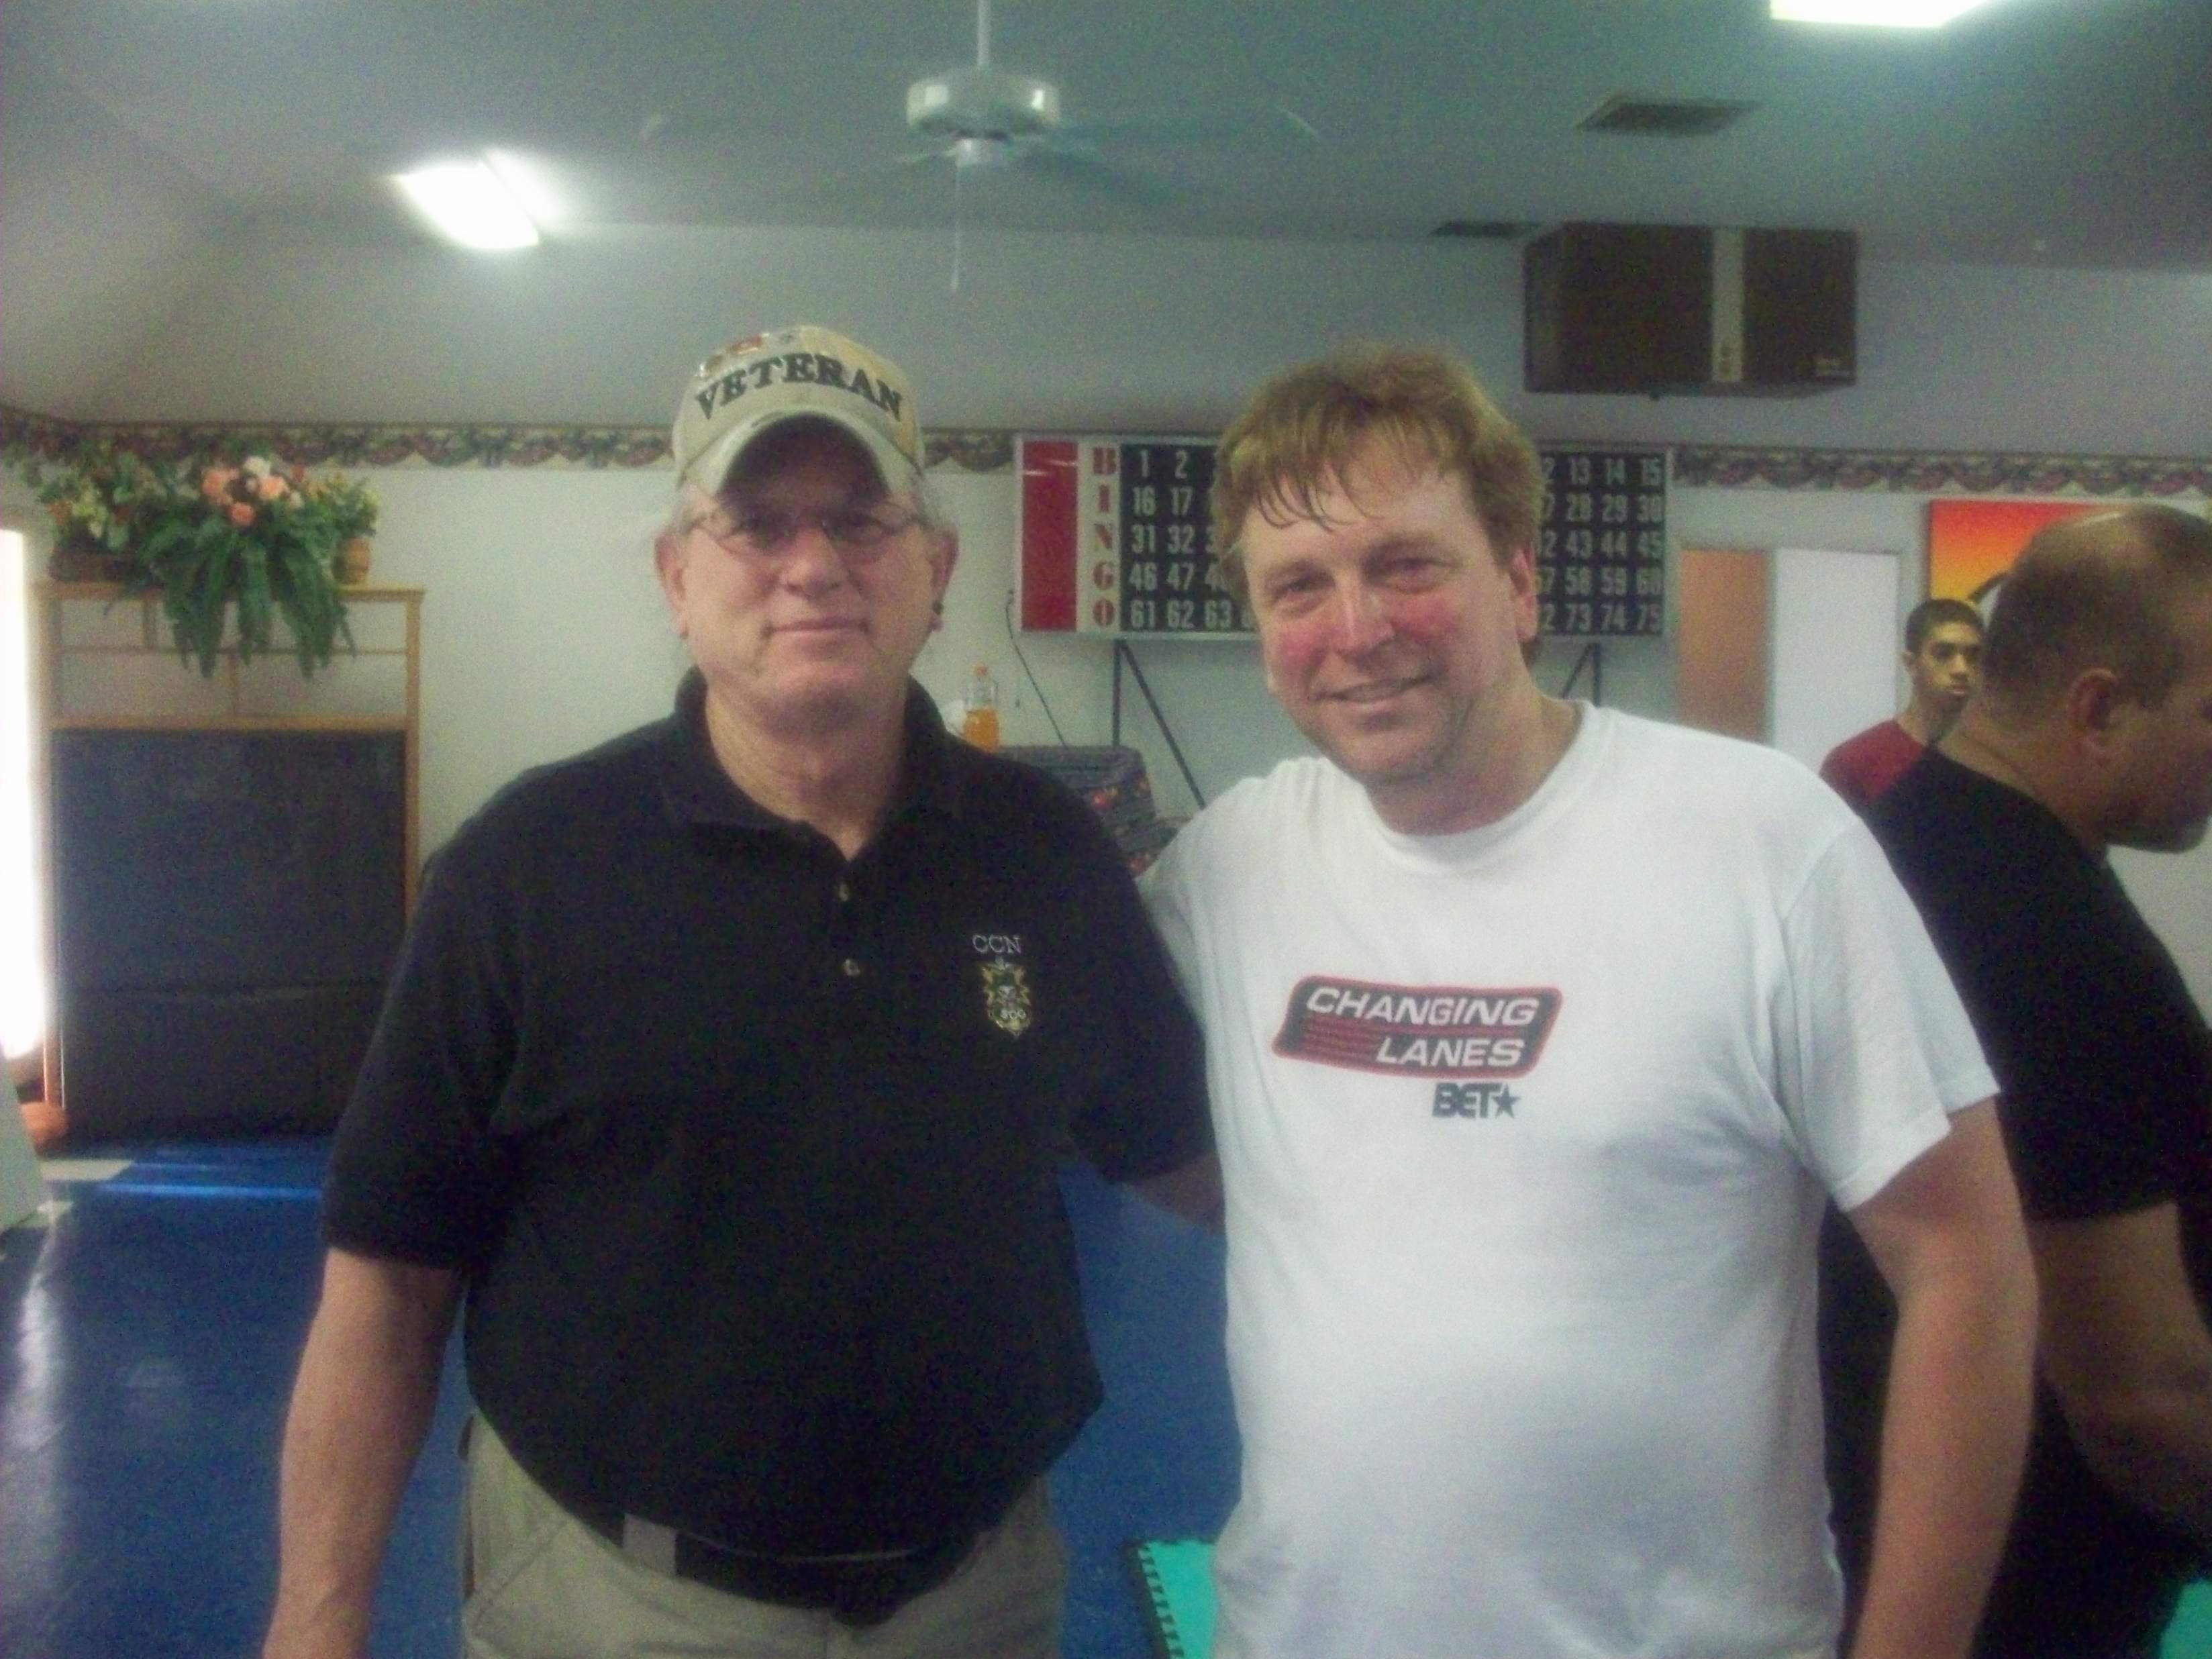 Me with Garry ONeil Anti terror task force founder